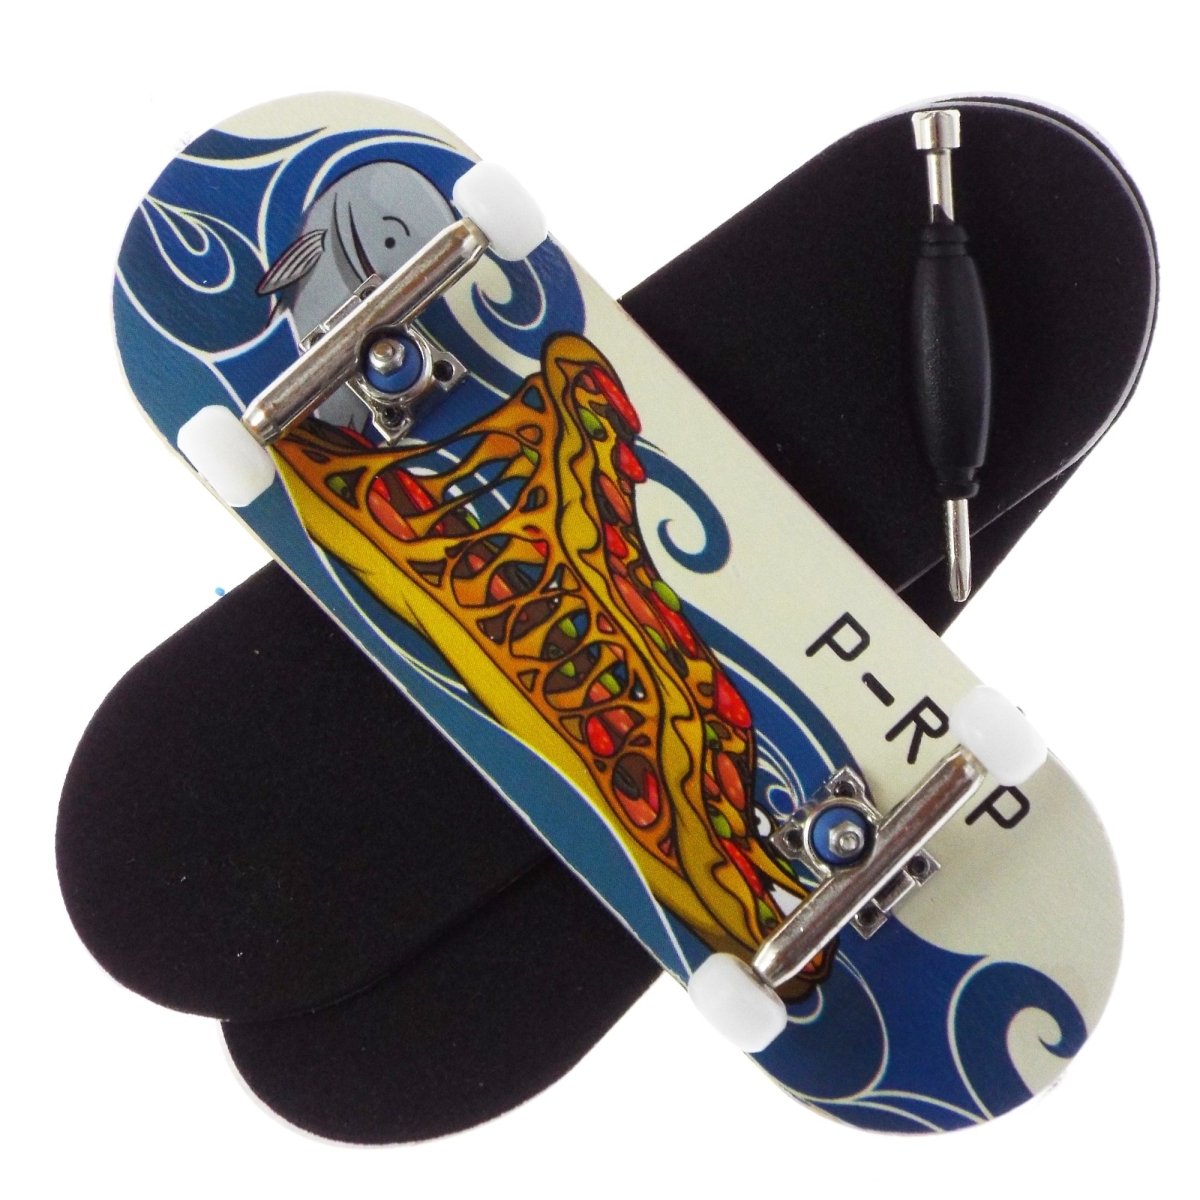 P-REP 32x97 Chromite Cmp - Eater Pizza - Fingerboard - FB Complete